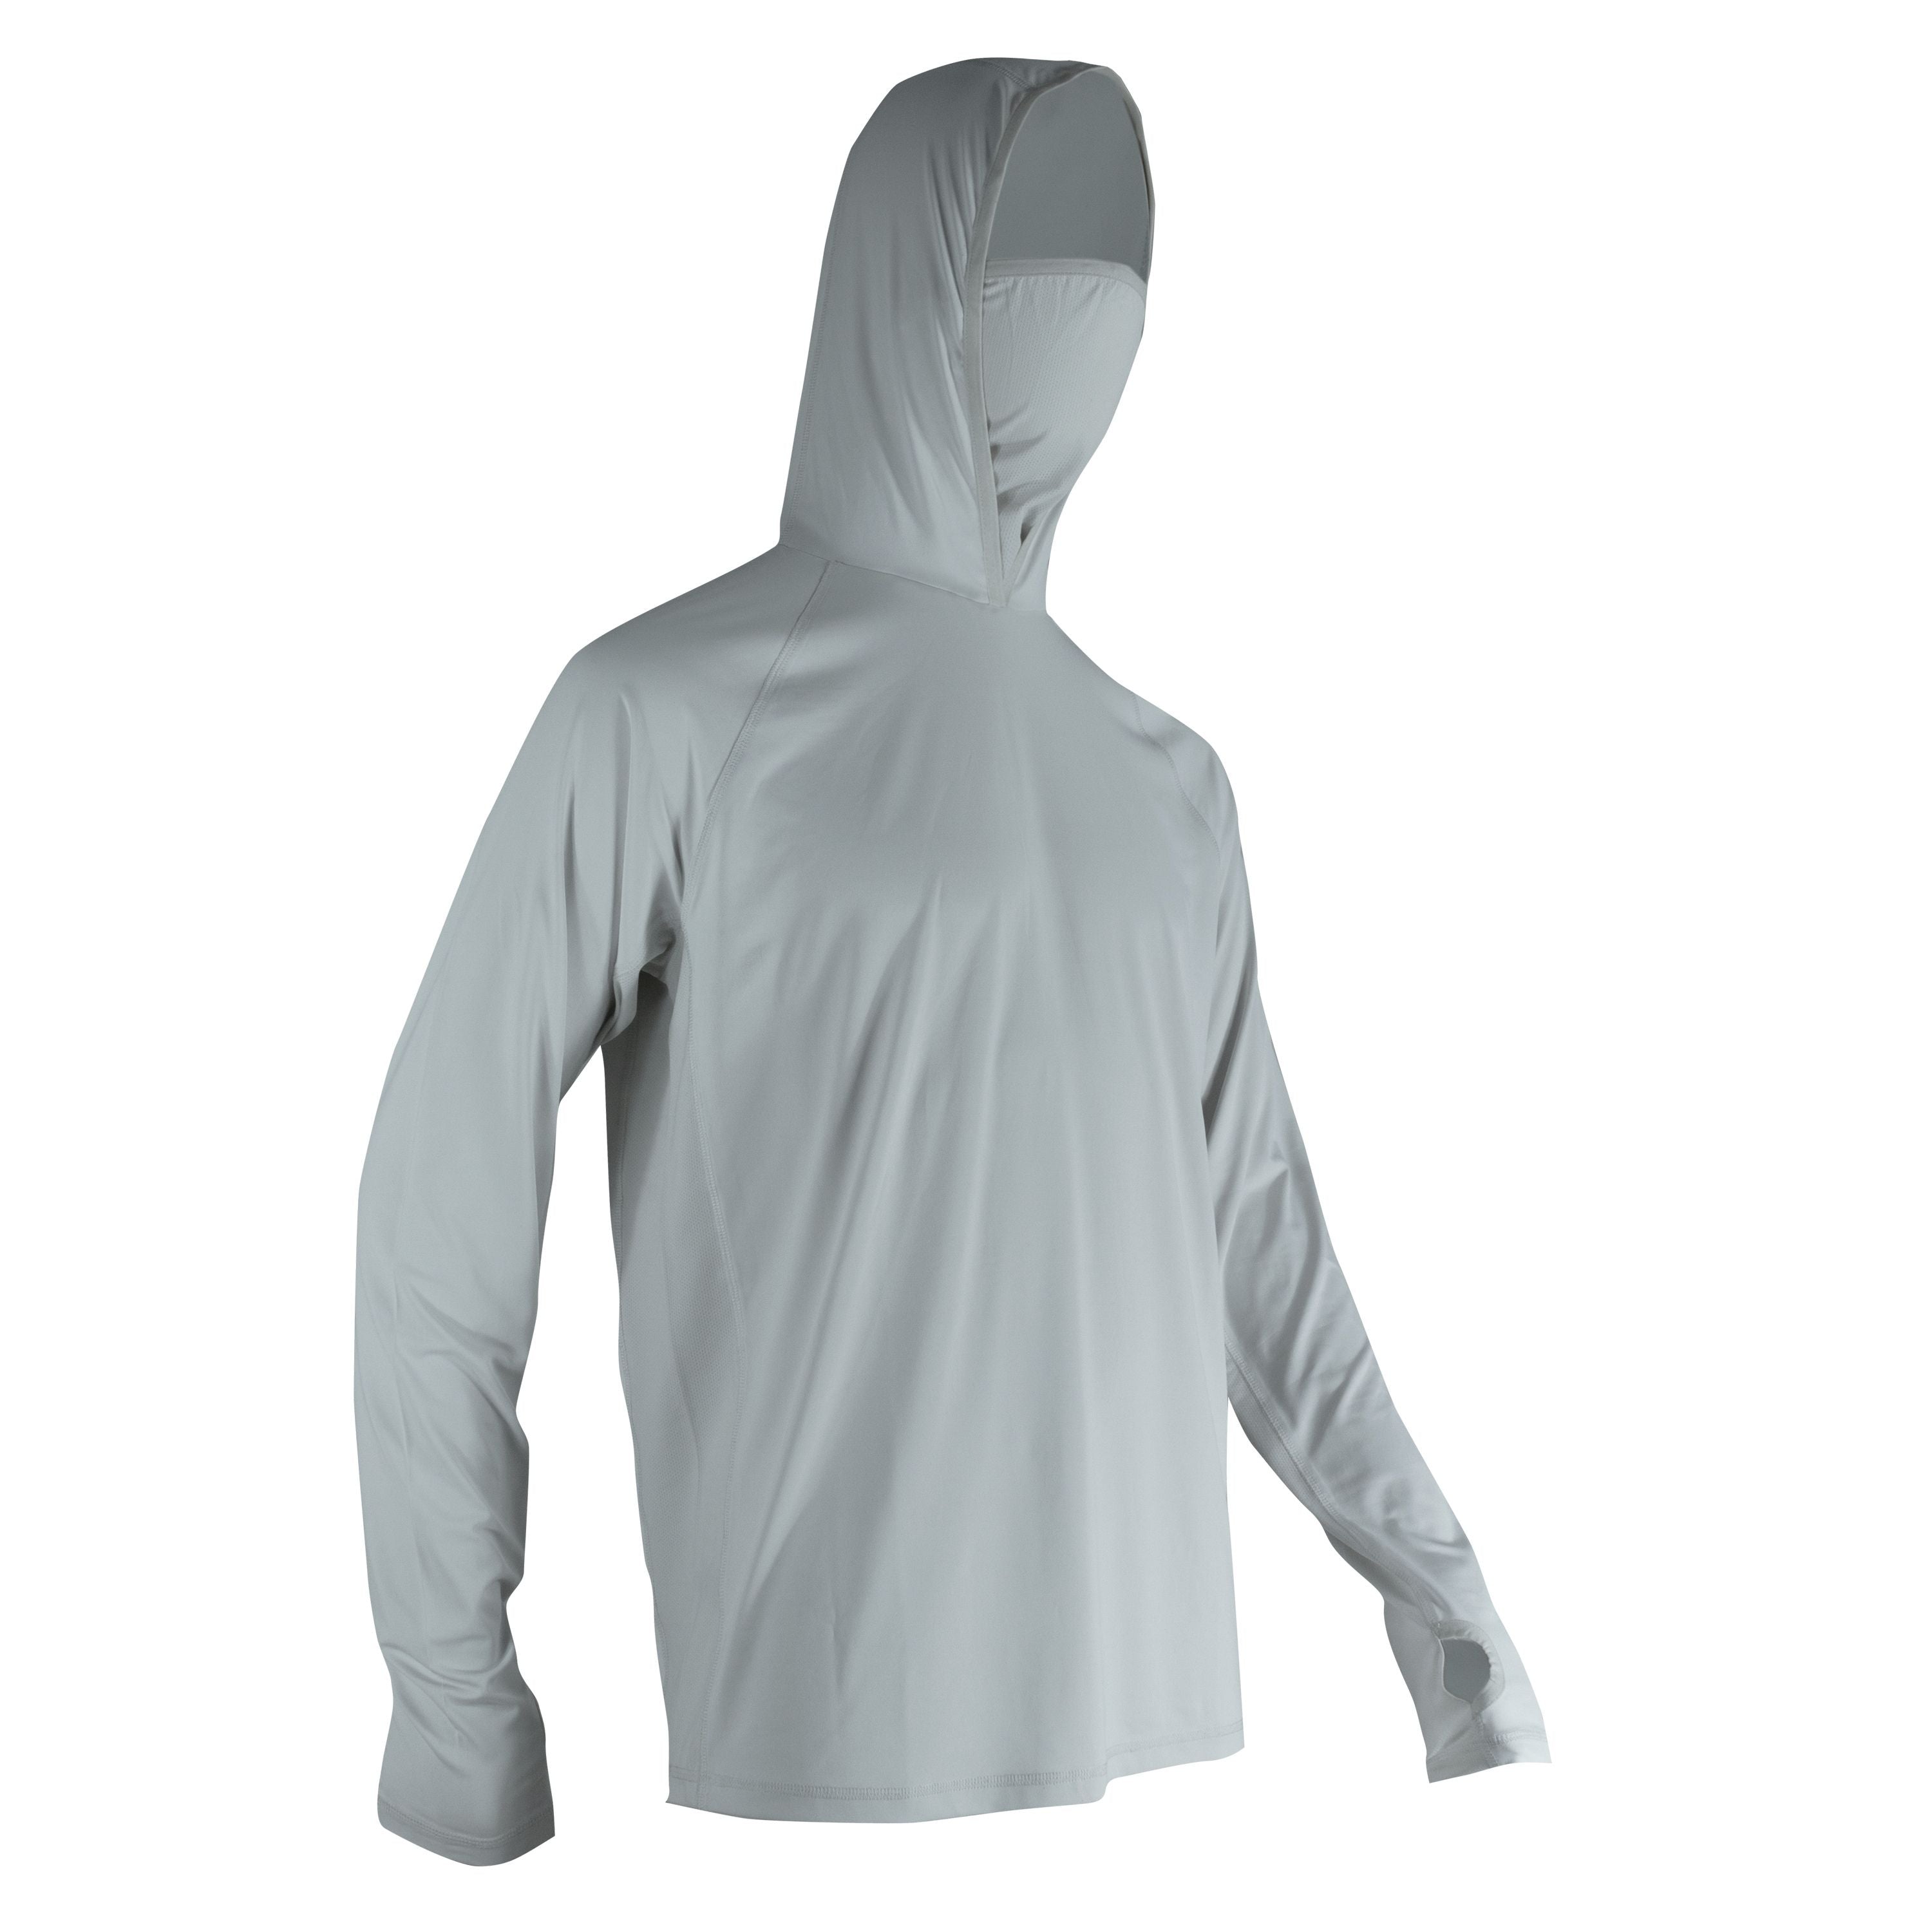 Long sleeves t-shirt with hood - Men's